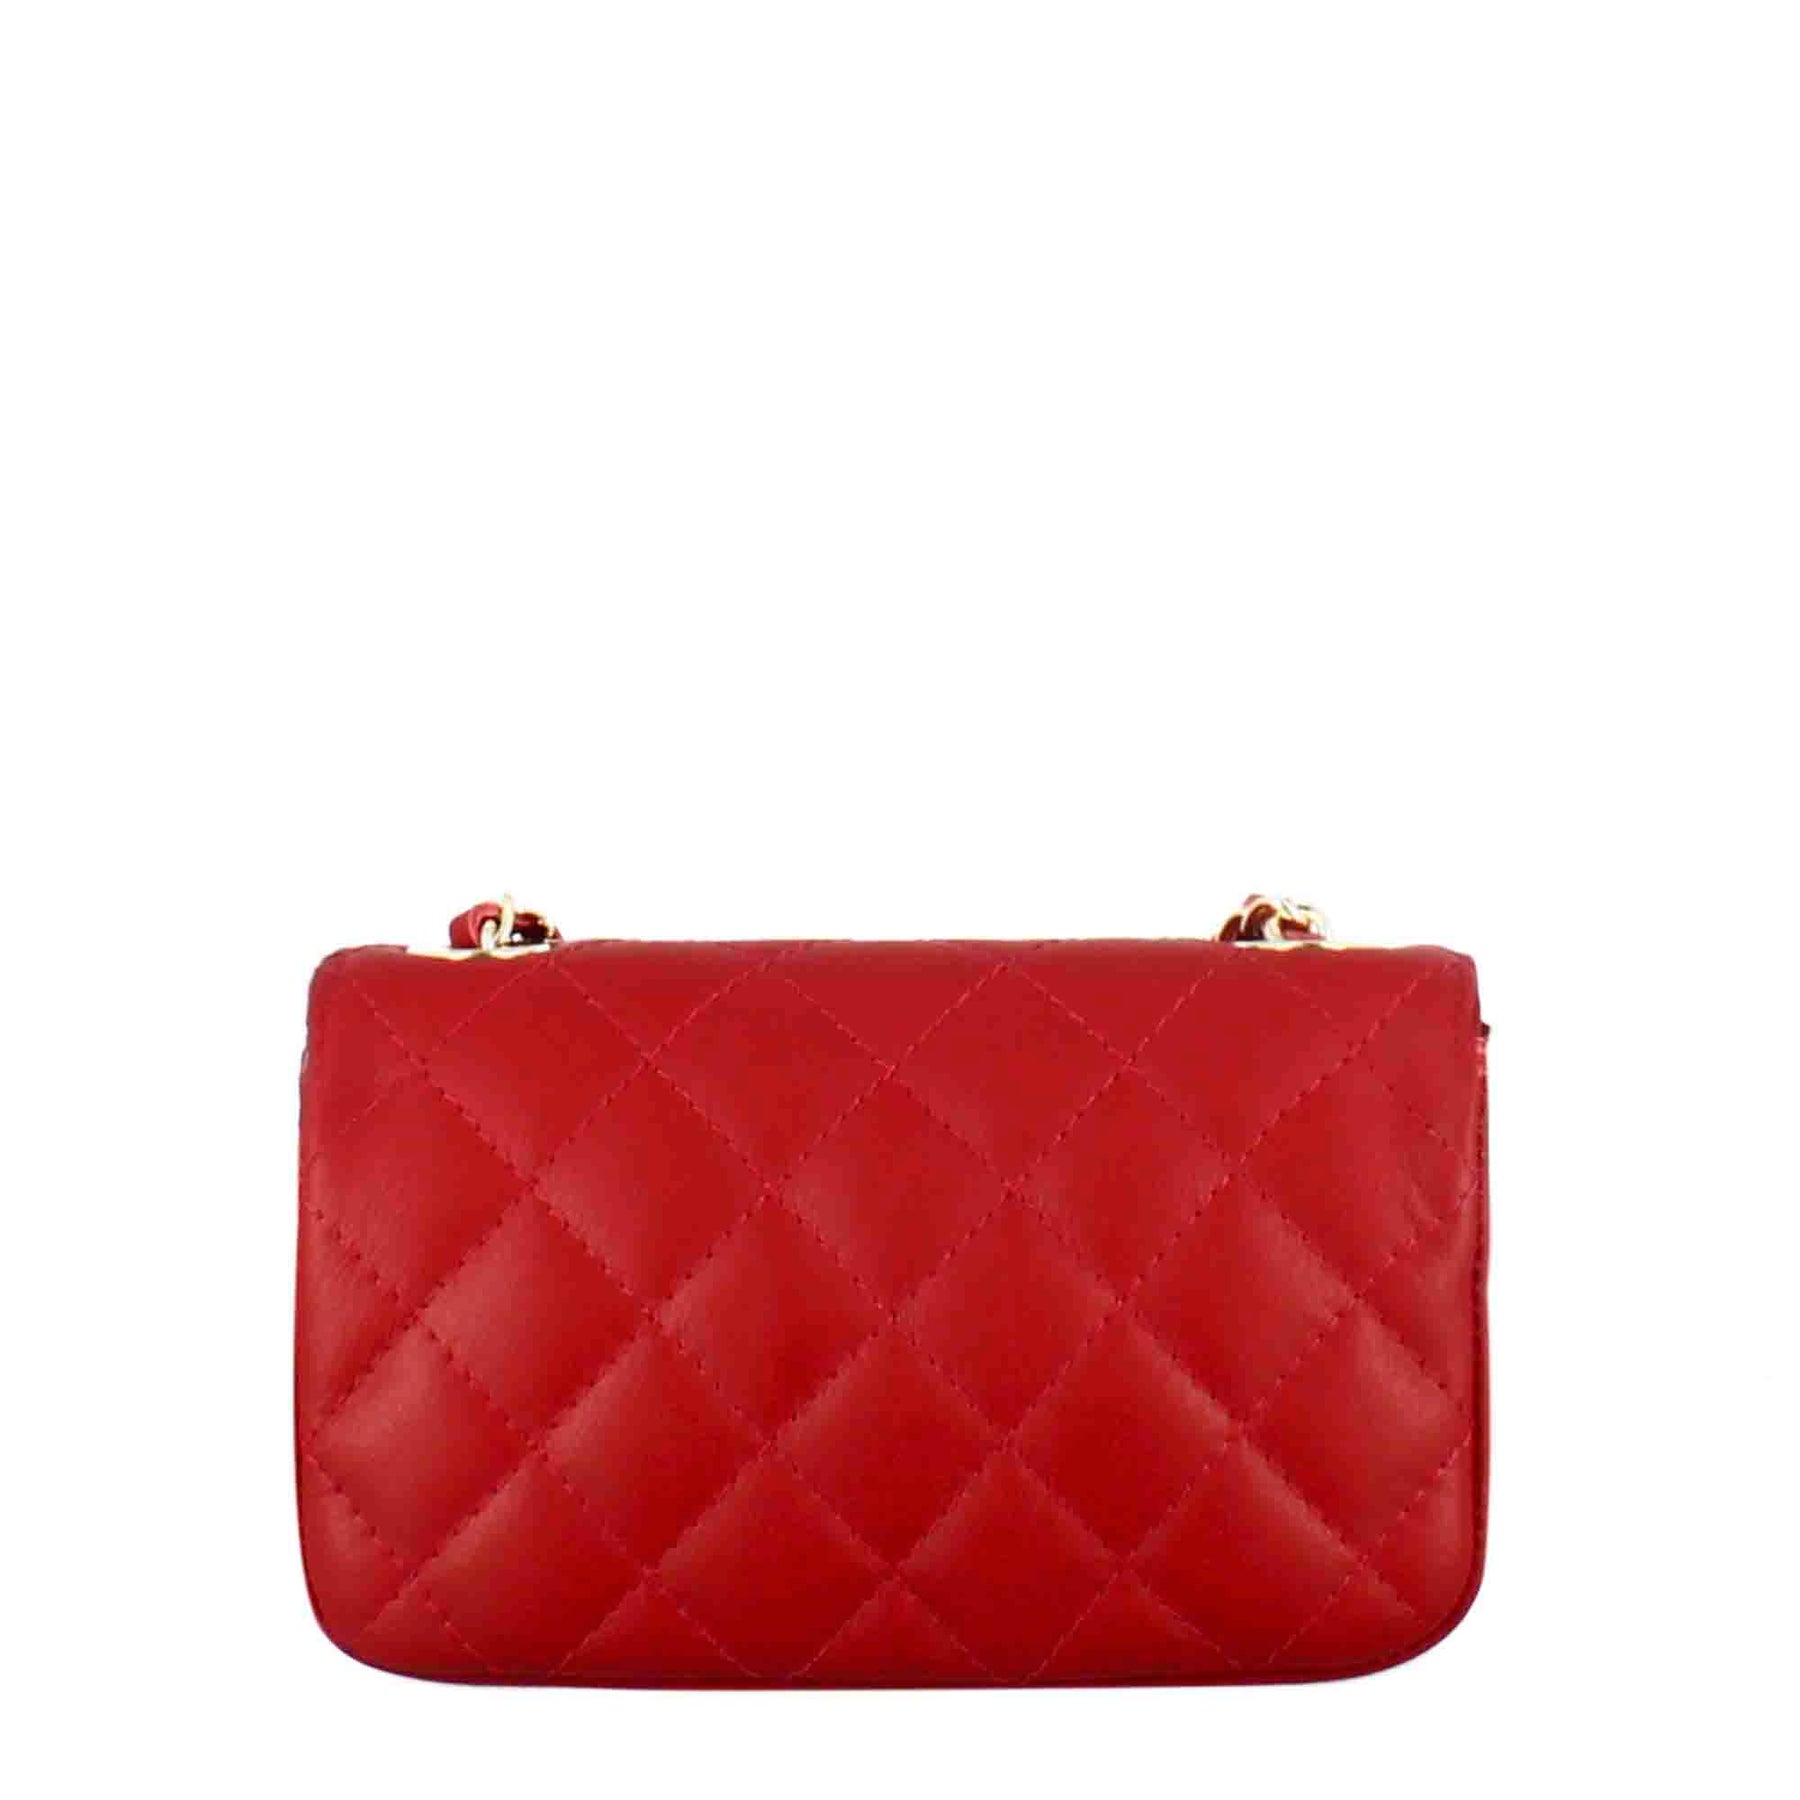 Vanity shoulder bag in red quilted leather